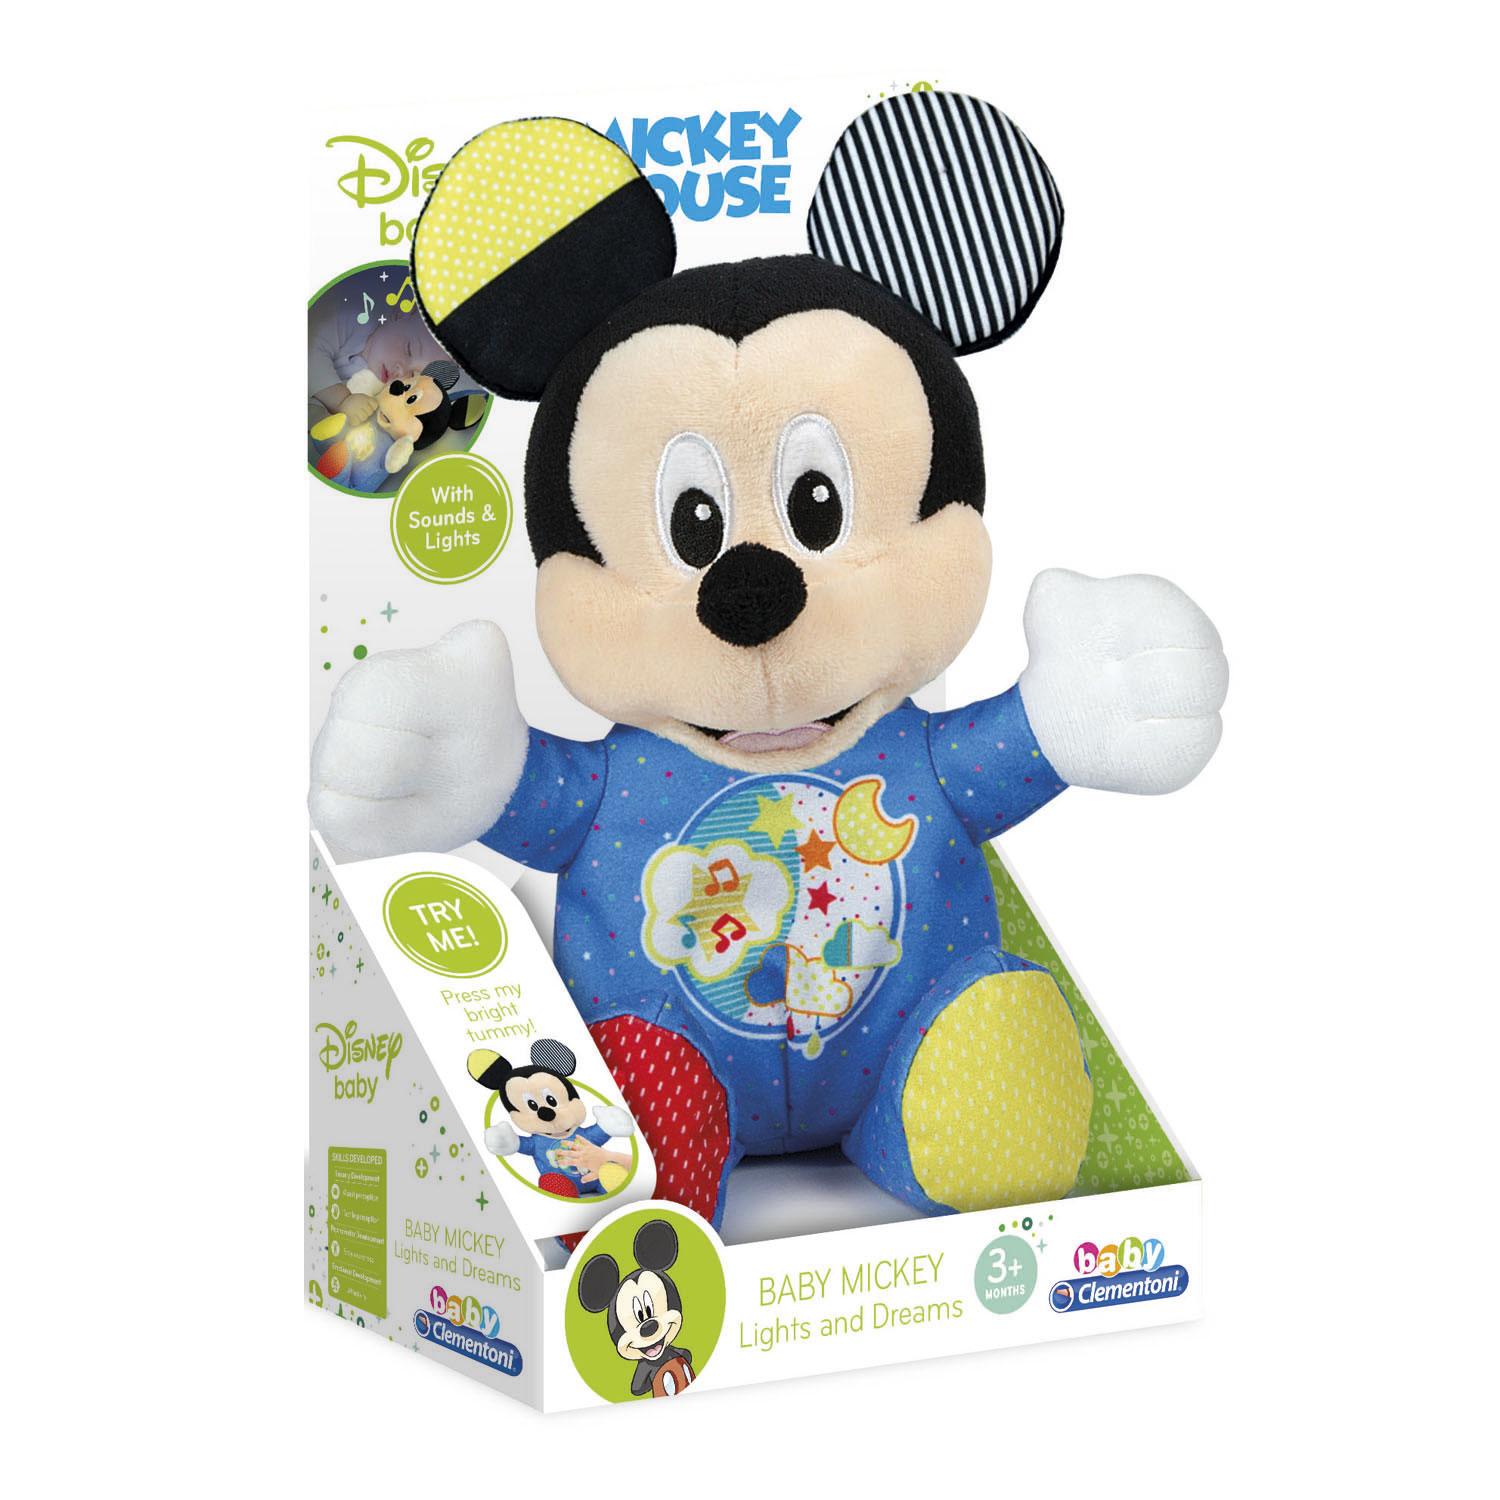 Stijg Hilarisch Walging Clementoni Mickey Mouse Plush Toy with Music and Light | Thimble Toys